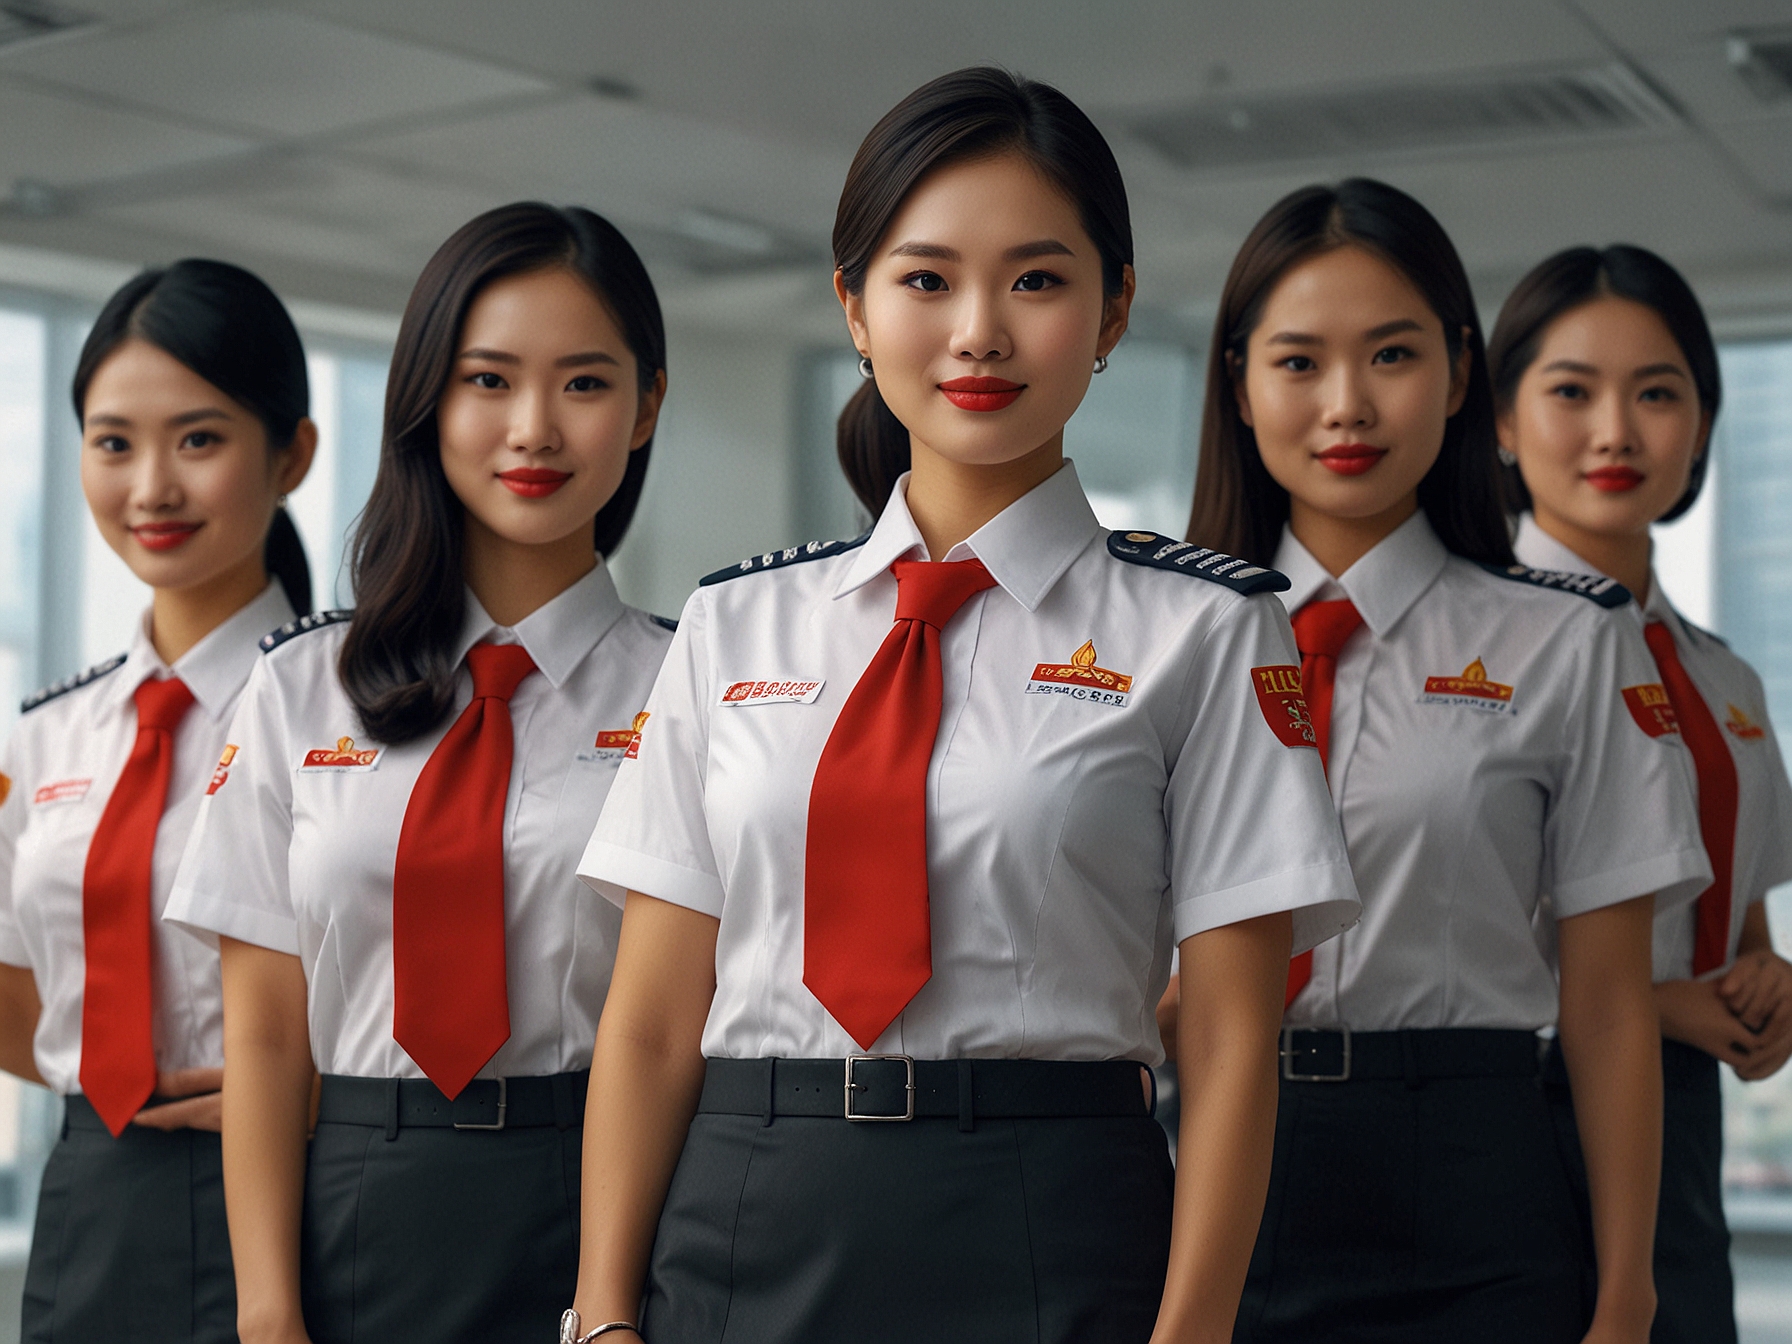 A group of newly recruited Thai flight attendants posing in uniform at Hong Kong Airlines' training center, showcasing their readiness to enhance the airline's service standards.